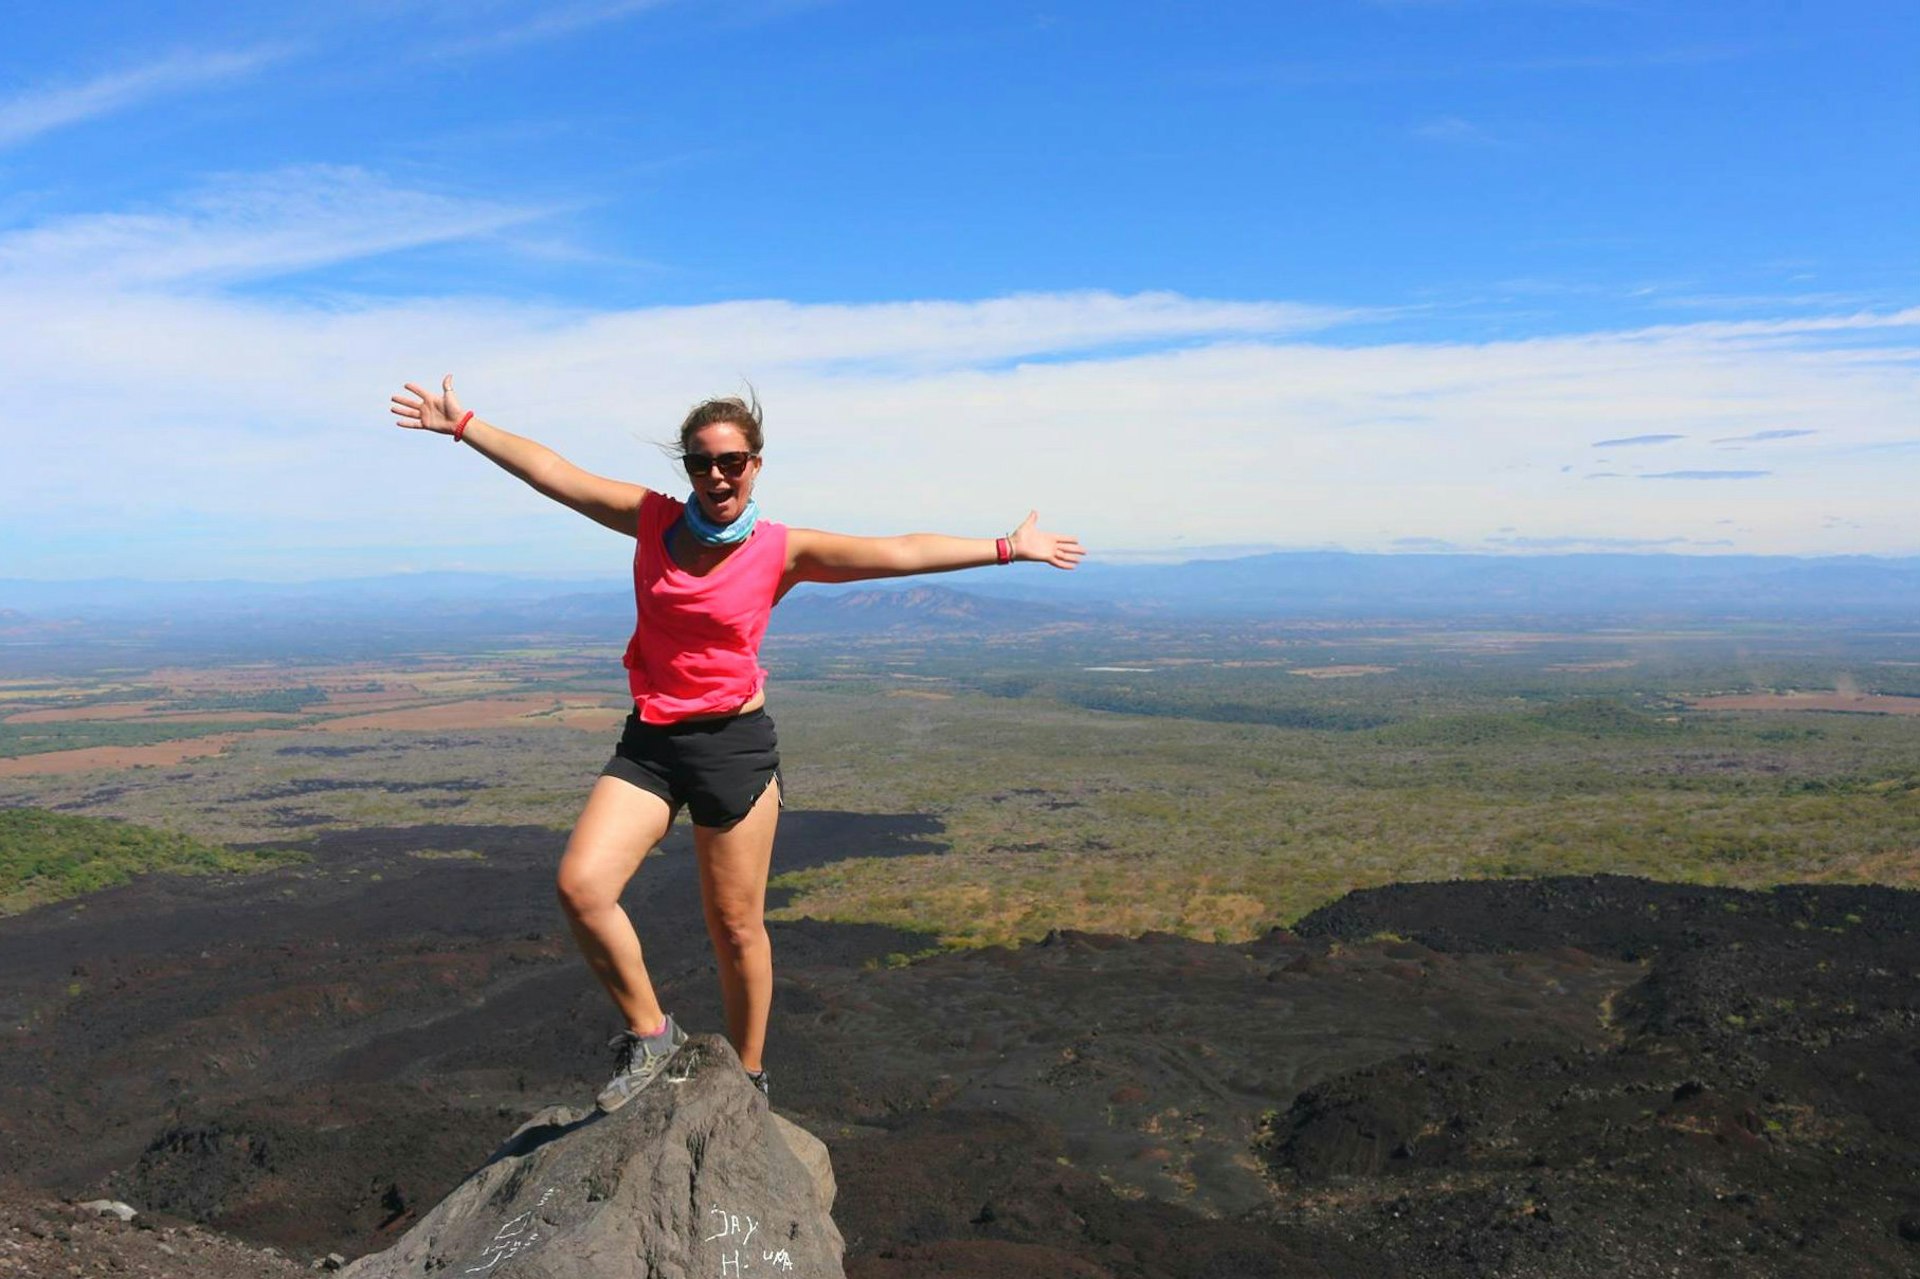 A woman stands on top of a volcano peak in trainers, black shorts and a pink sleeveless t-shirt with her arms outstretched. The Nicaraguan landscape spreads out far into the distance behind her and the blue sky is scattered with clouds.